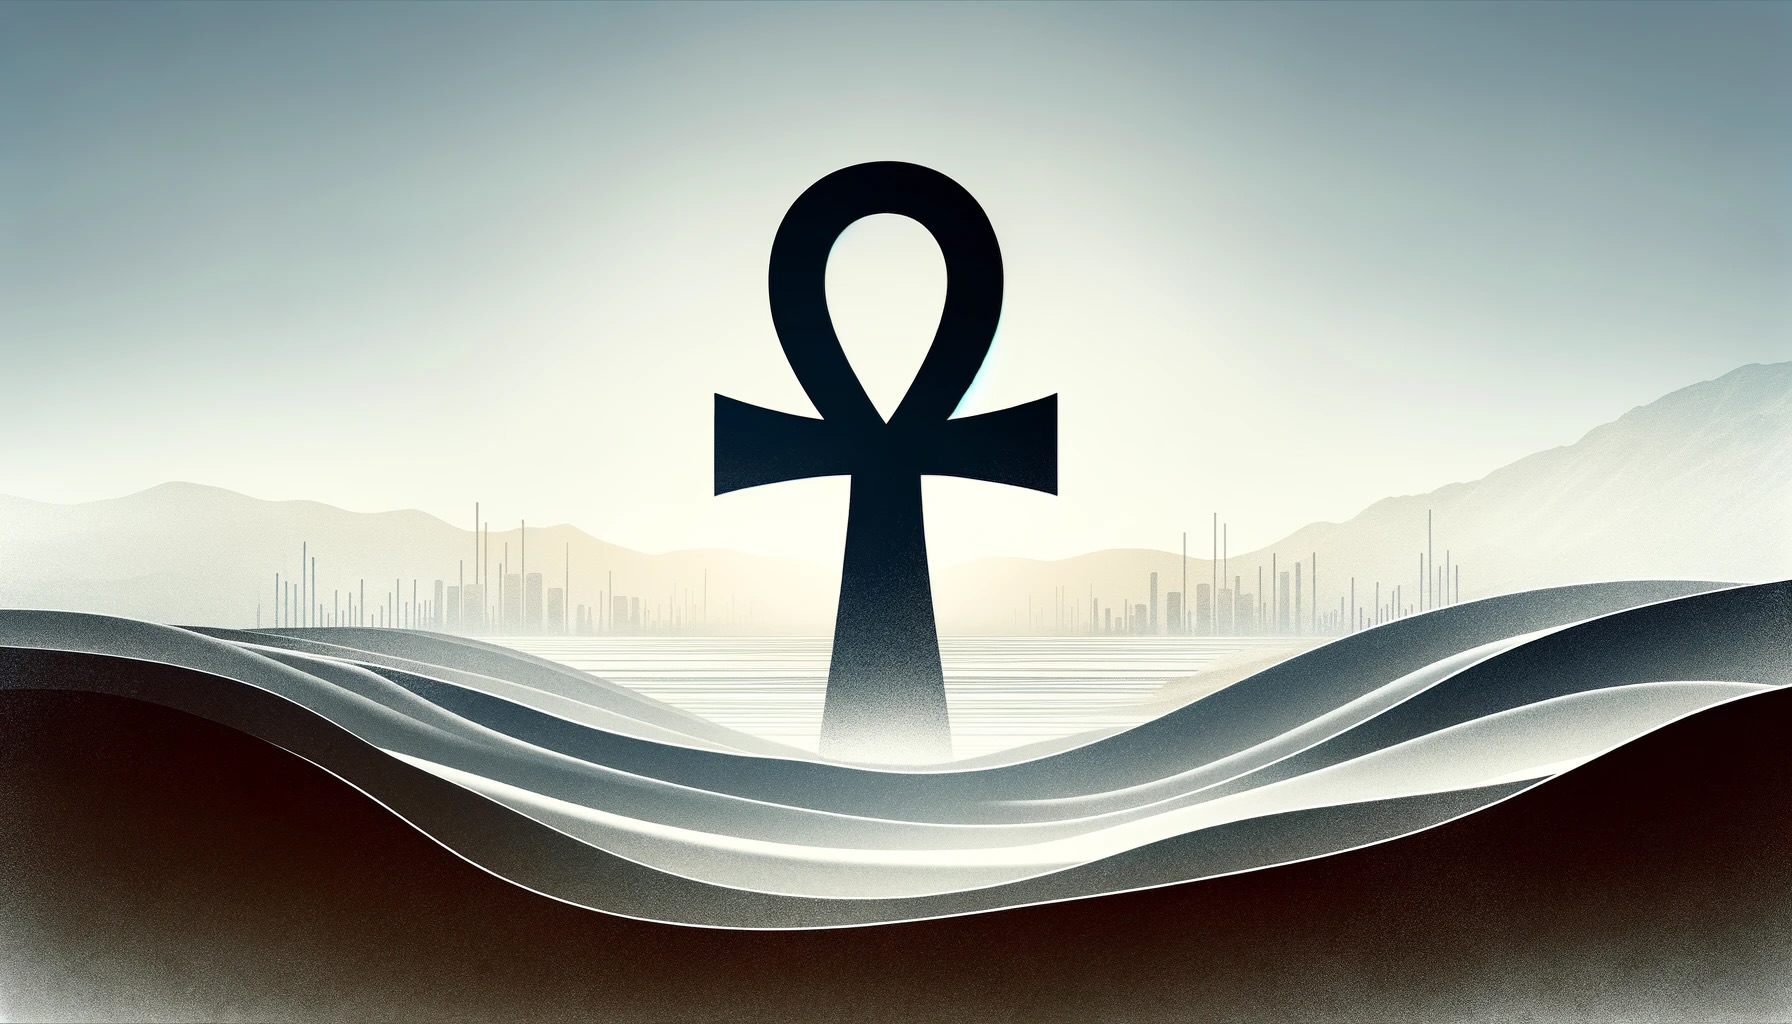 A minimalist landscape image that seamlessly blends the ancient symbol of the Ankh with the concept of a successful business model.